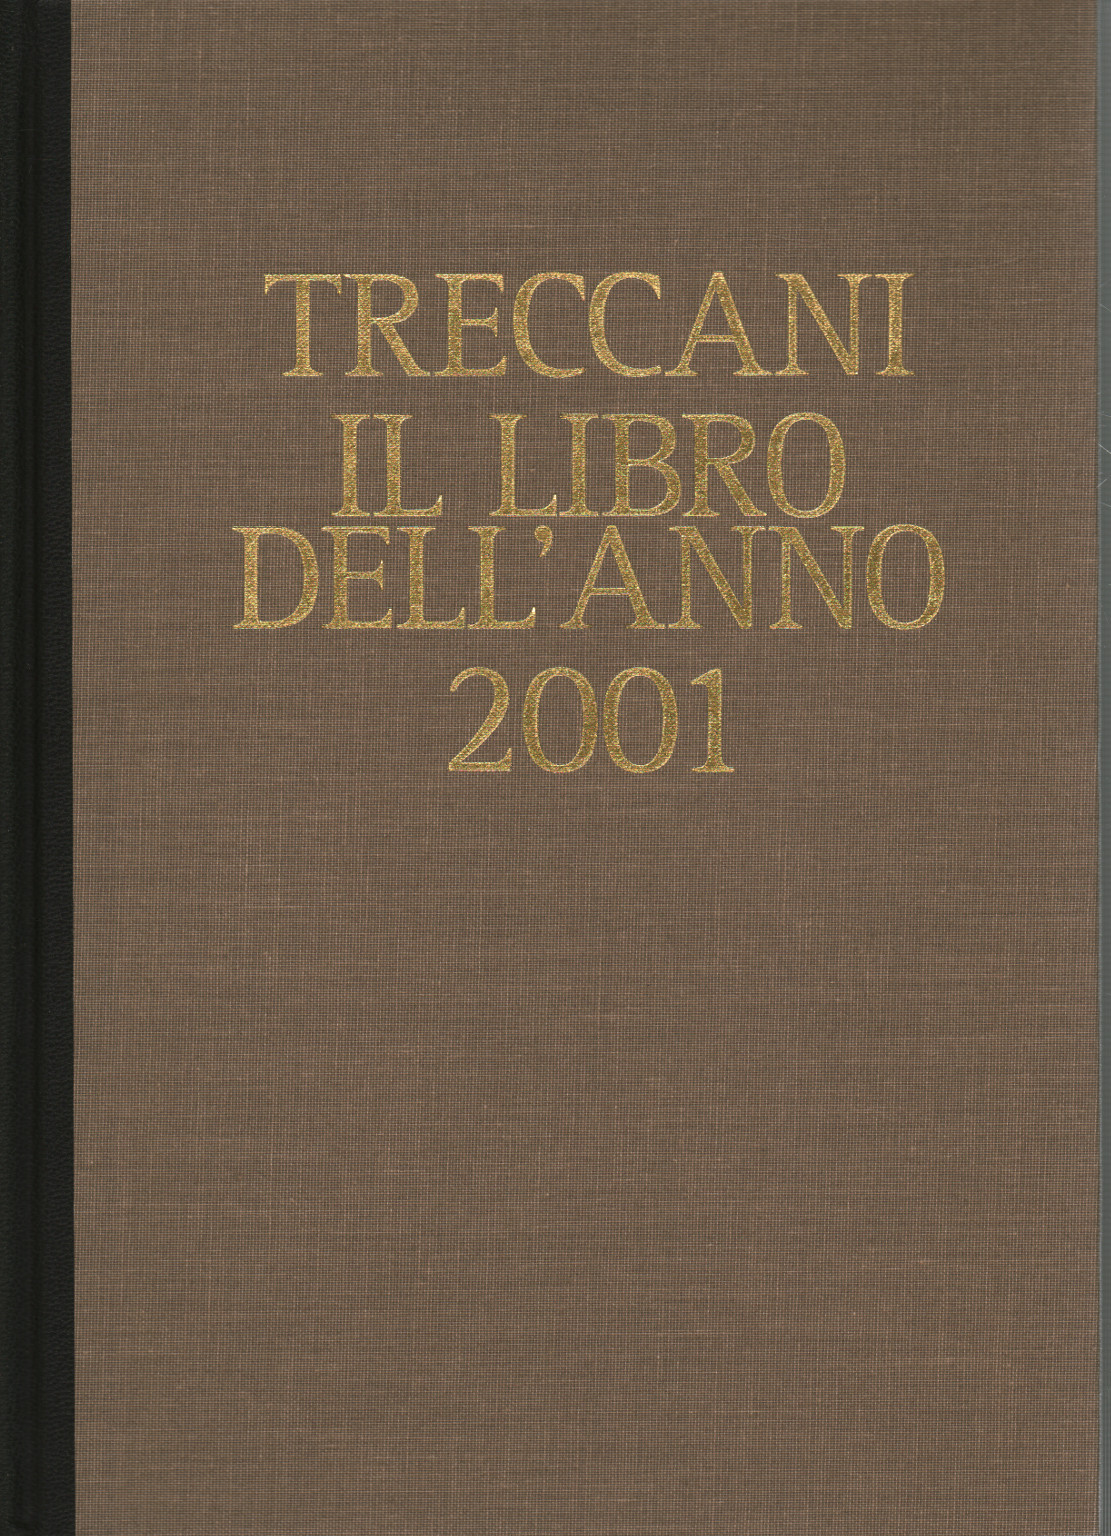 Treccani. The book of the year 2001, s.a.